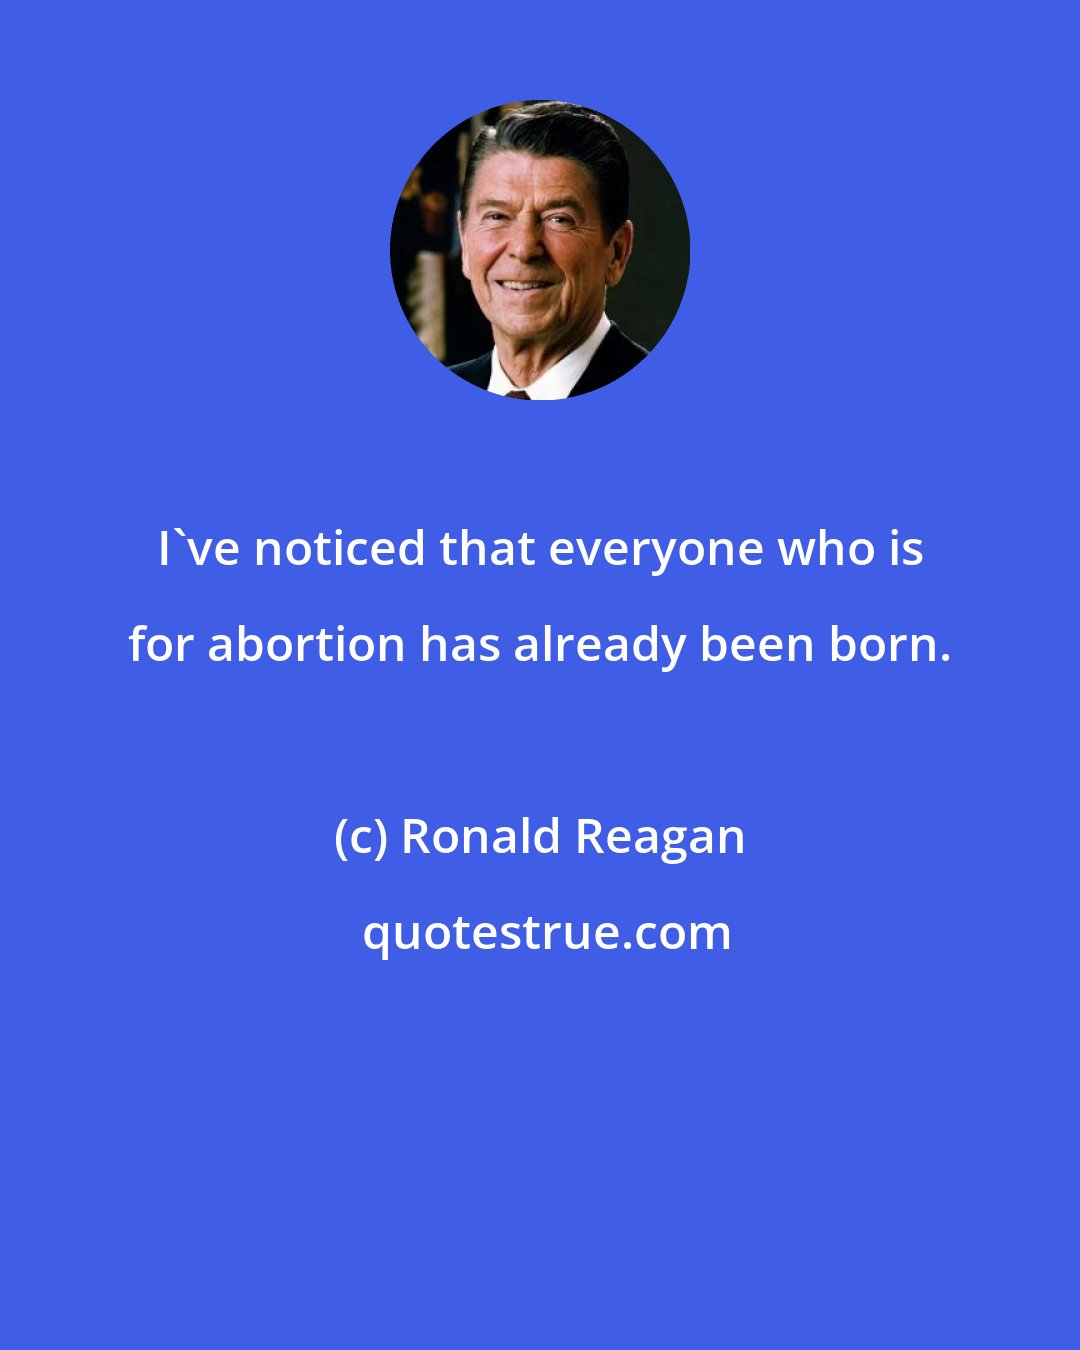 Ronald Reagan: I've noticed that everyone who is for abortion has already been born.